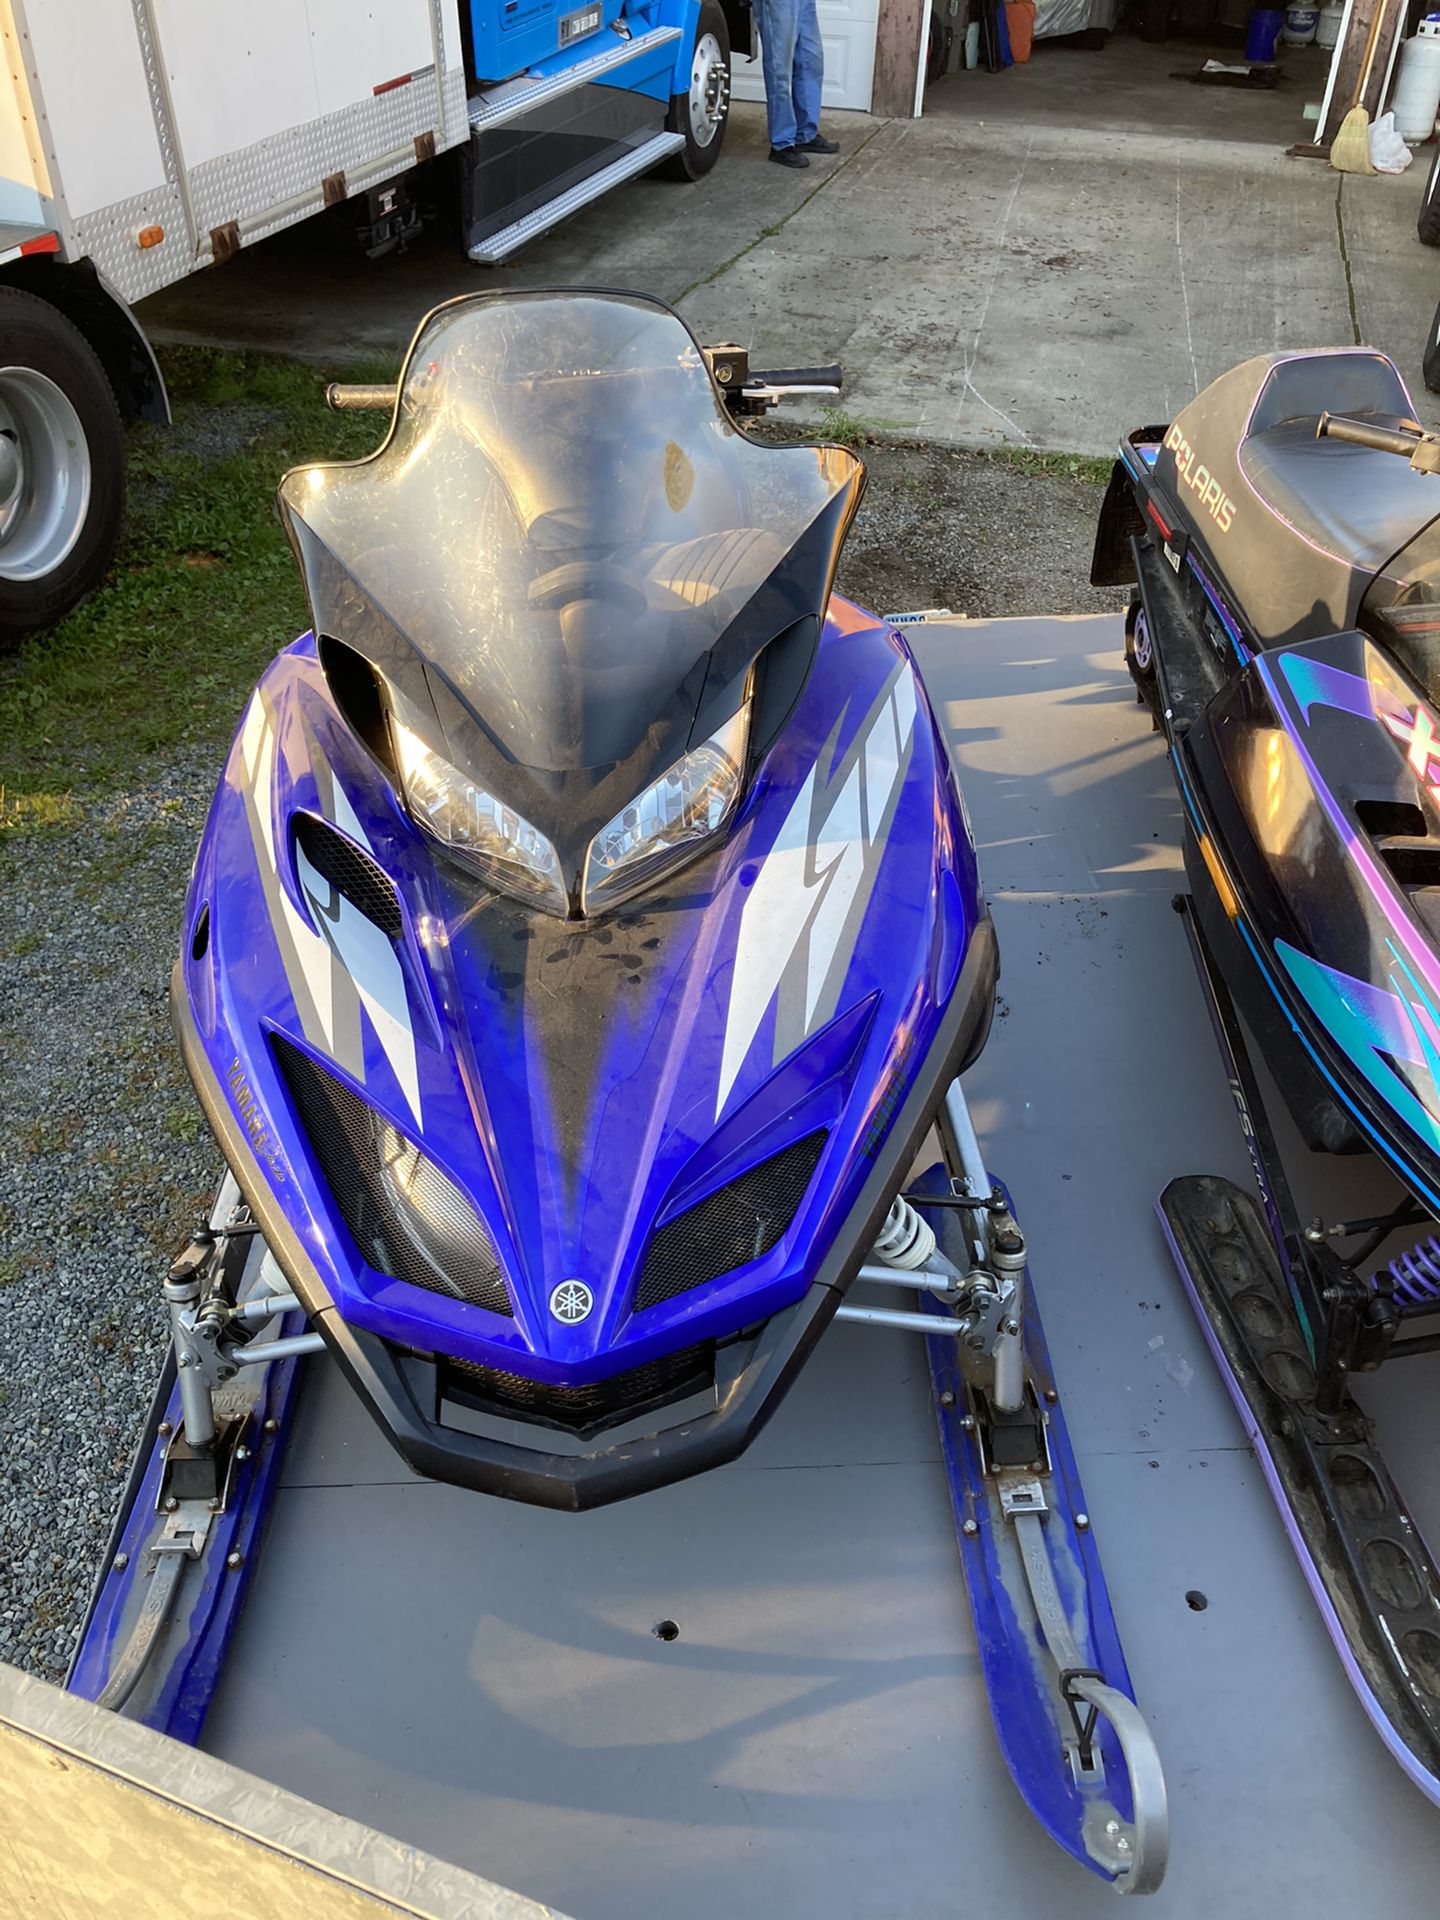 Snowmobiles and trailer